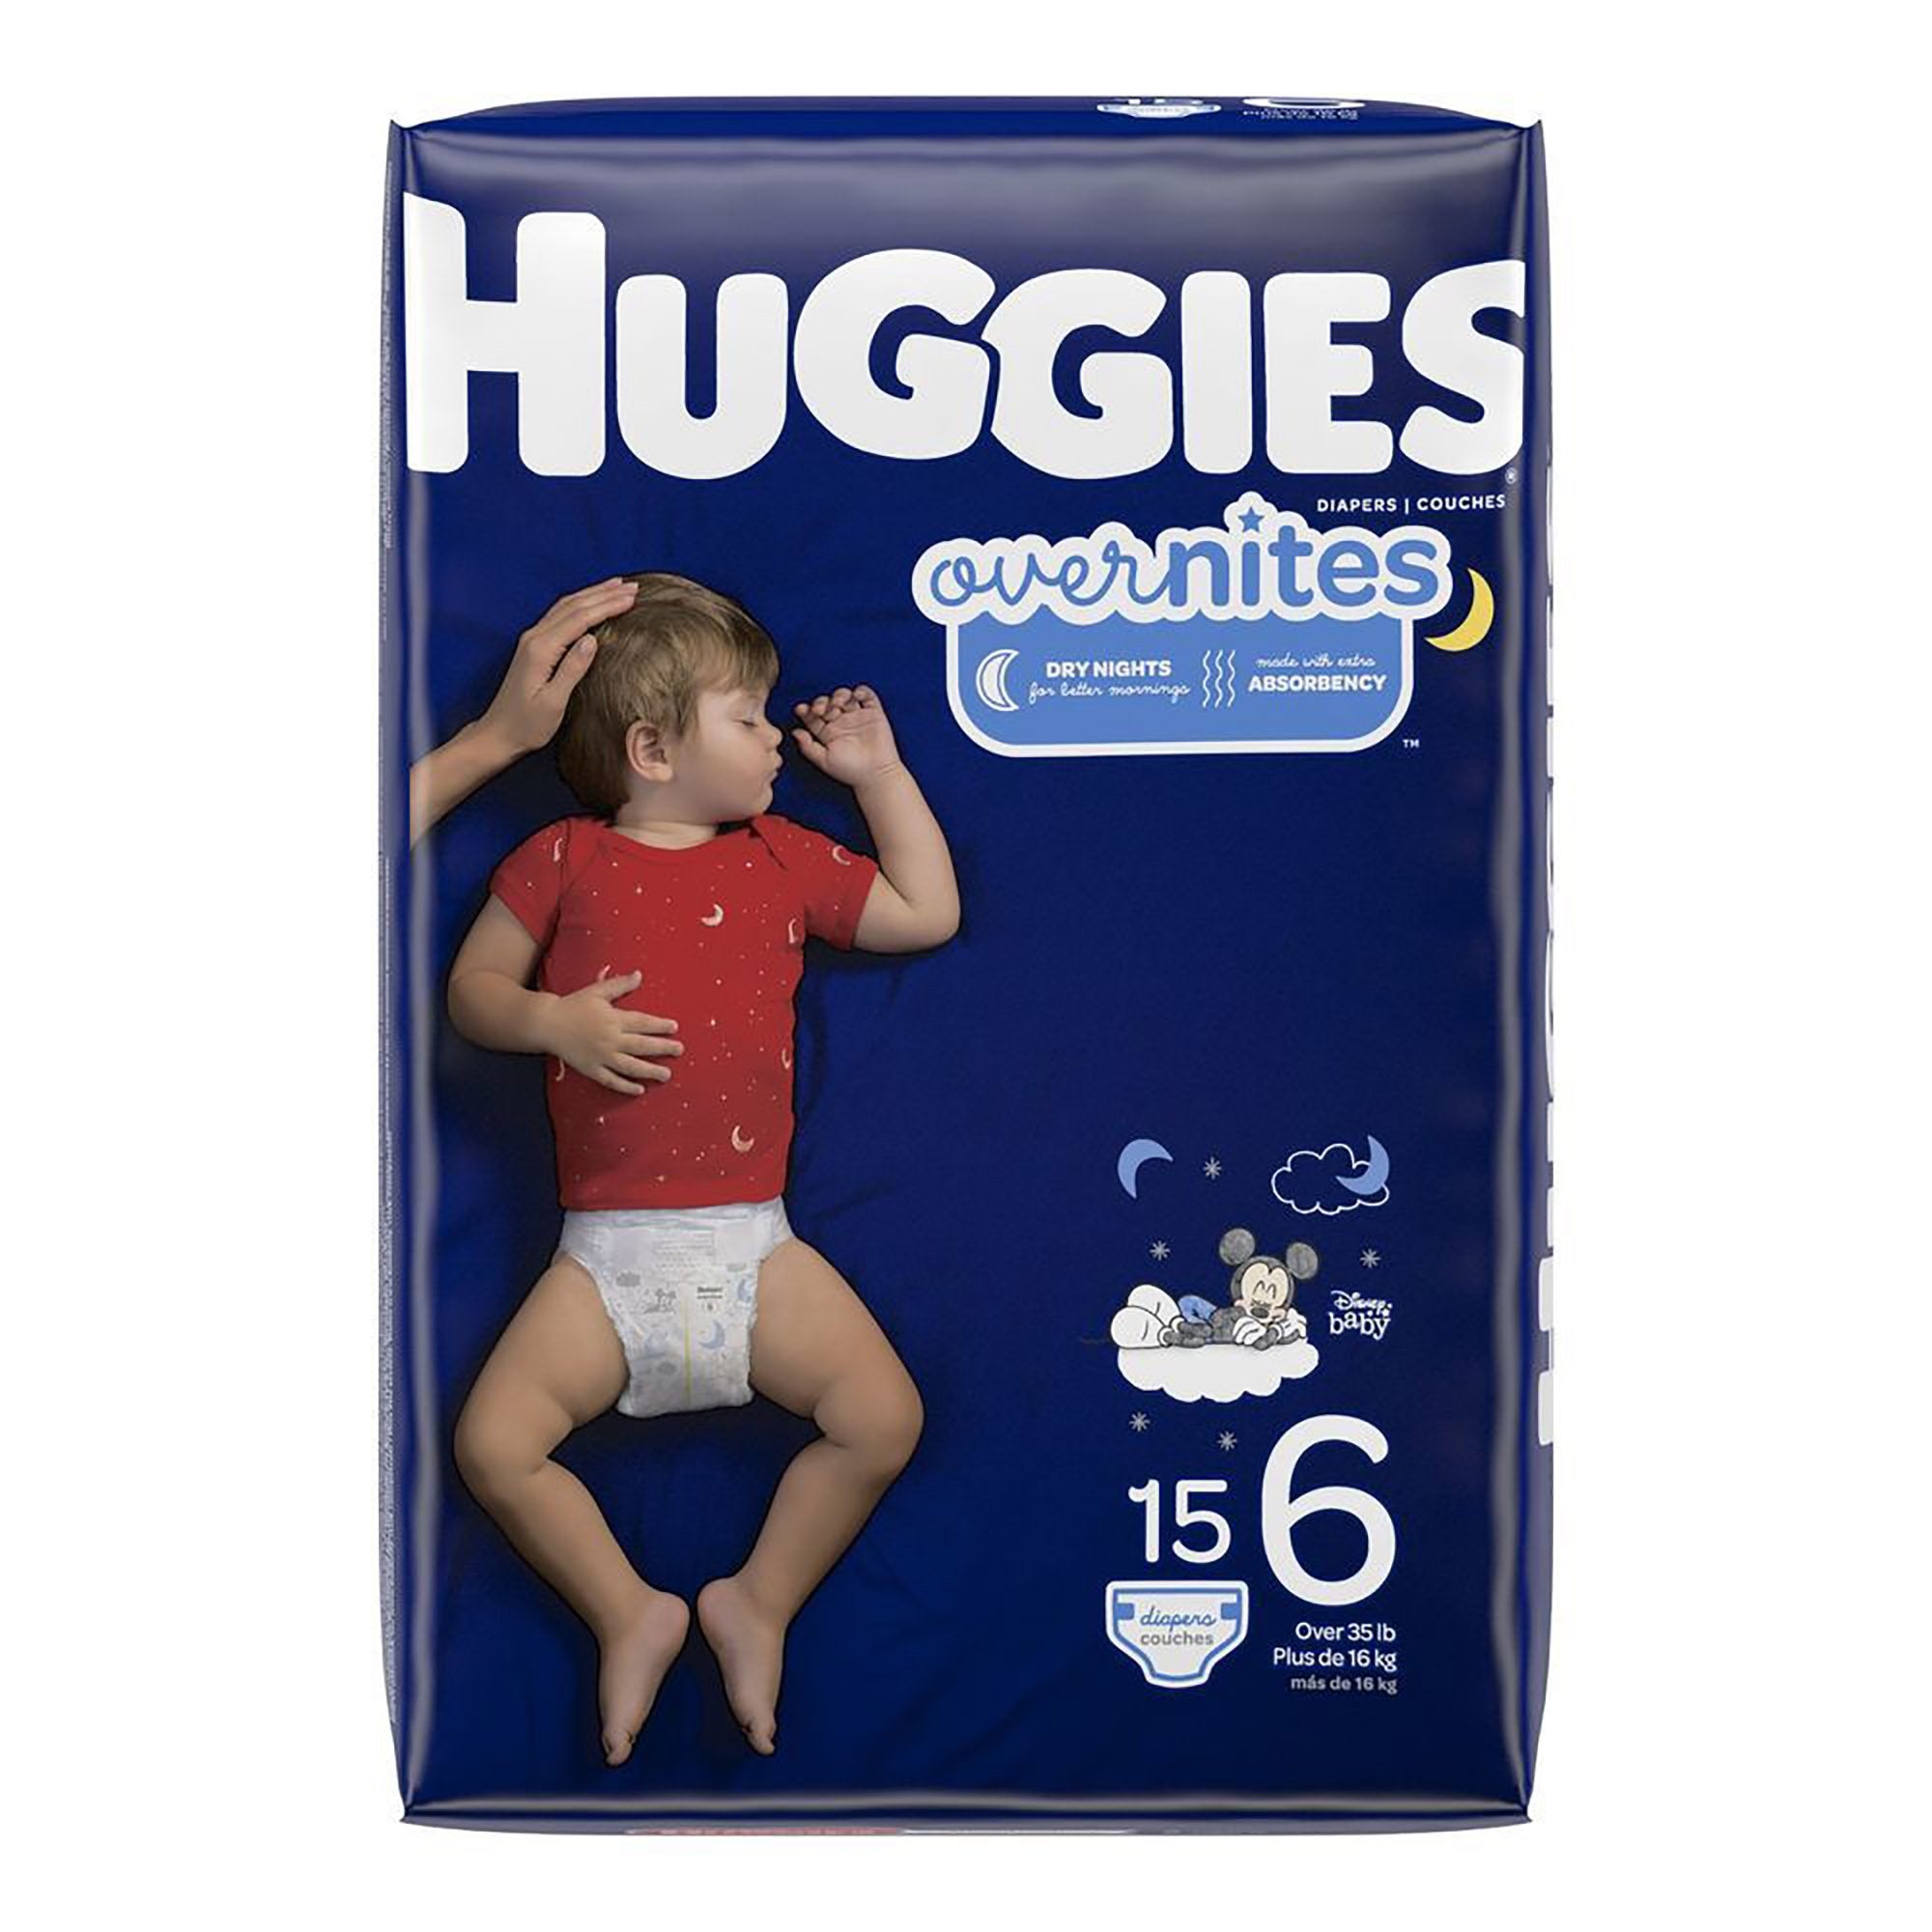 Unisex Baby Diaper Huggies Overnites Size 6 Disposable Heavy Absorbency